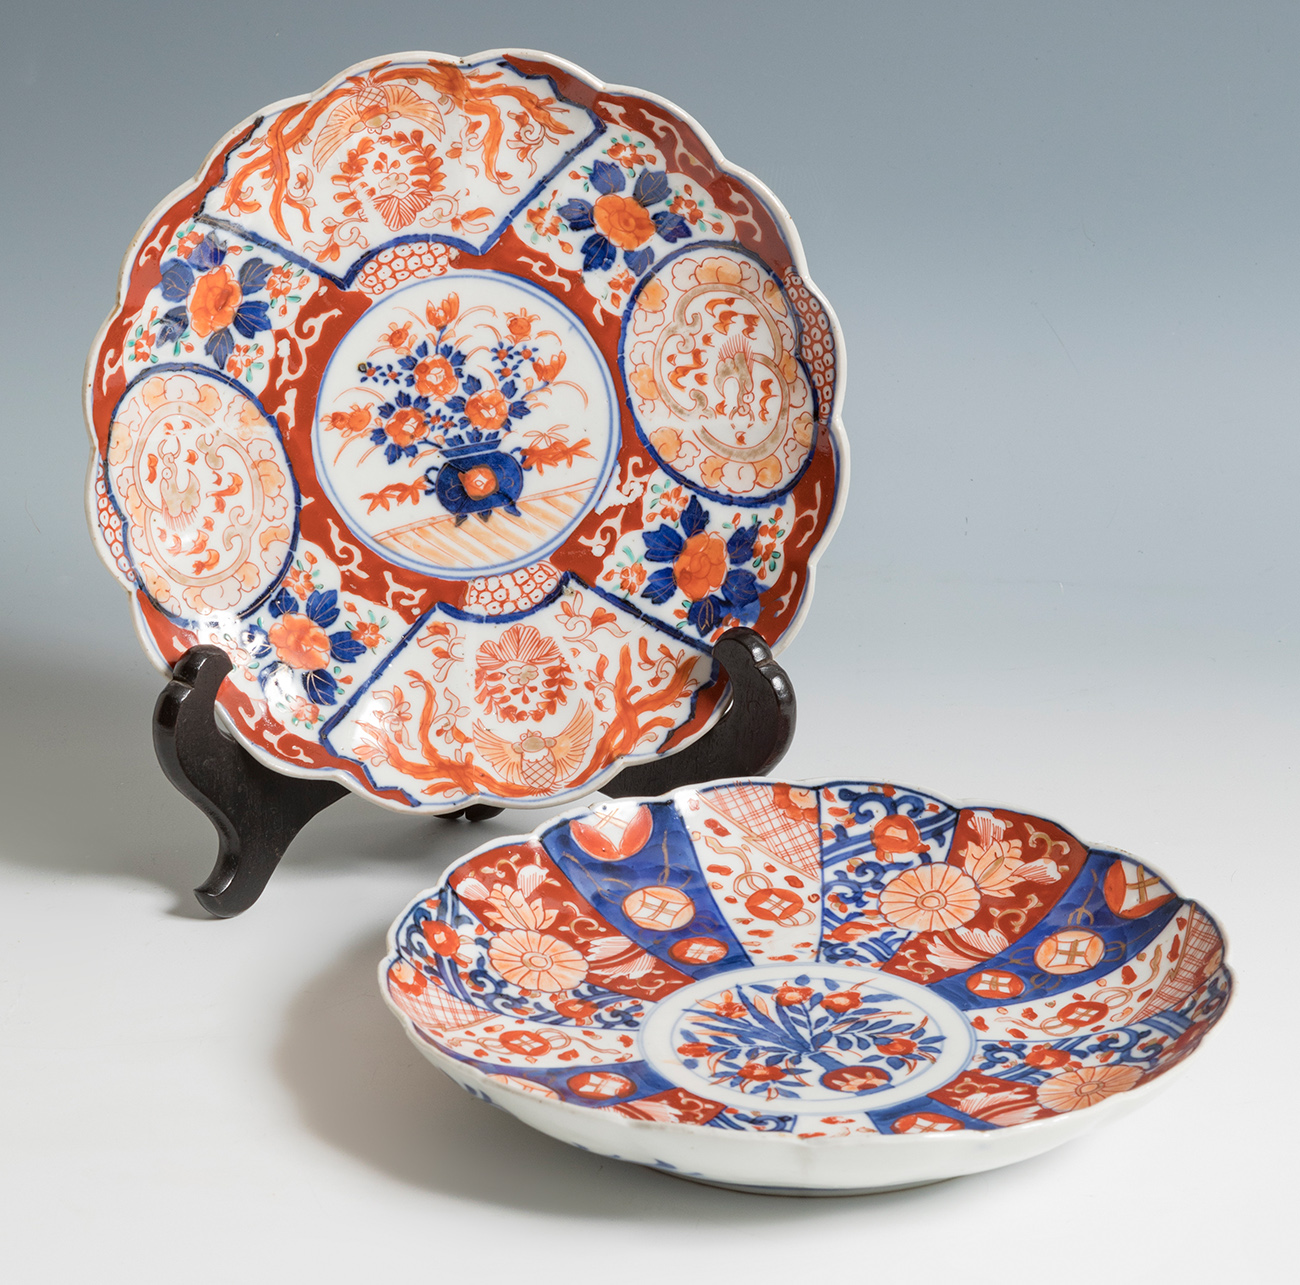 Two Imari-style dishes. Japan, 20th century.Glazed porcelain.Measurements: 21 cm in diameter.Pair of - Image 3 of 3